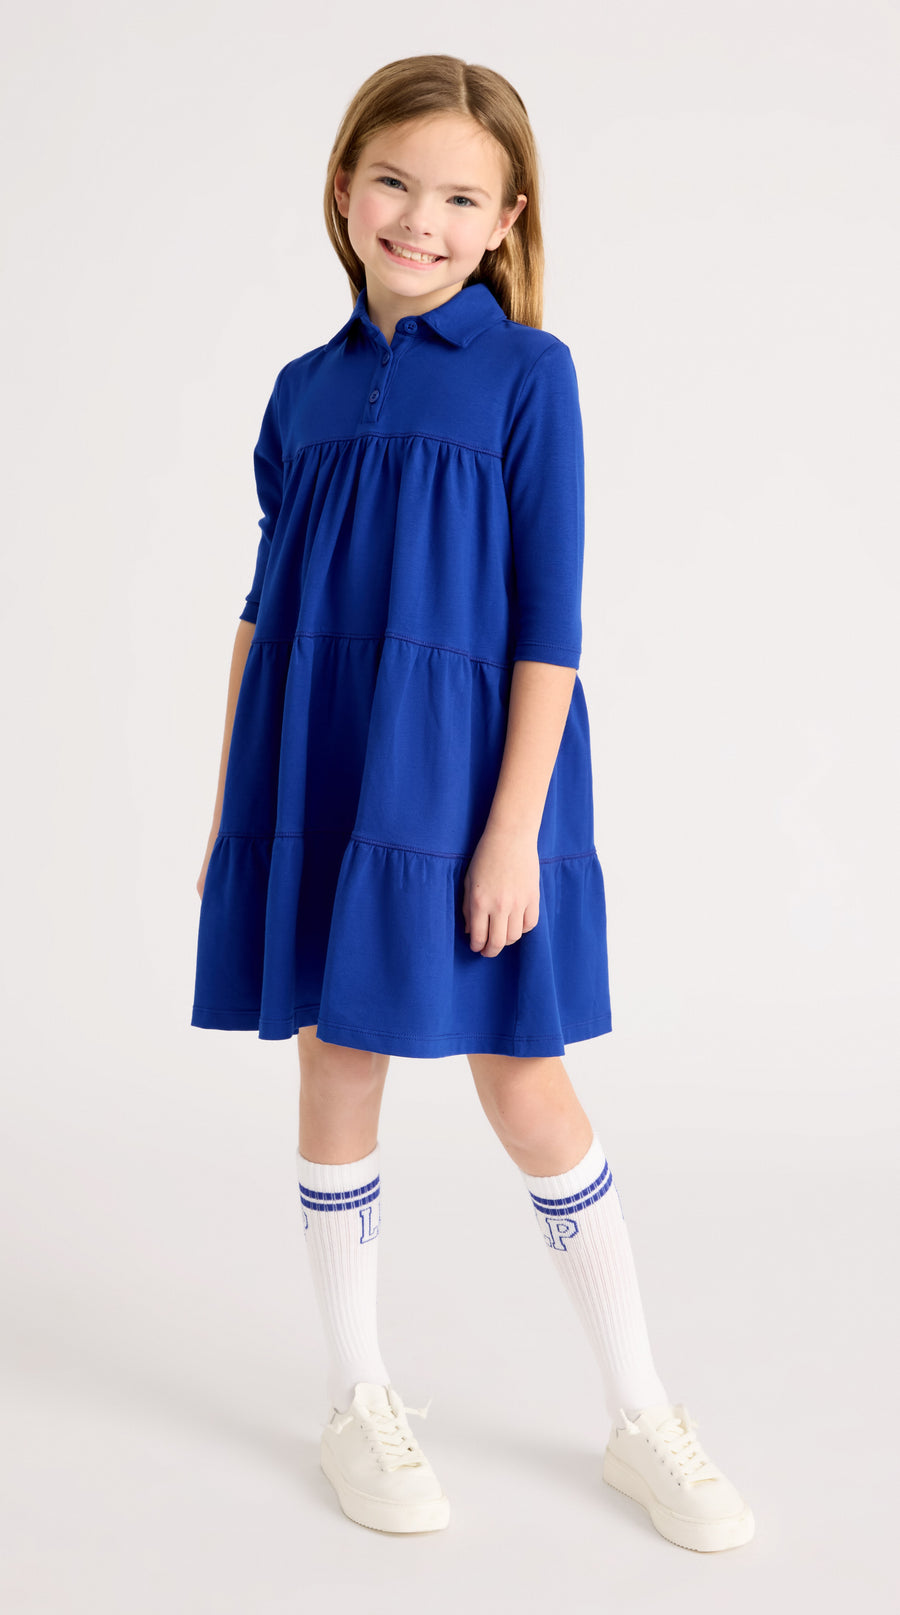 Royal blue tiered dress by Little Parni